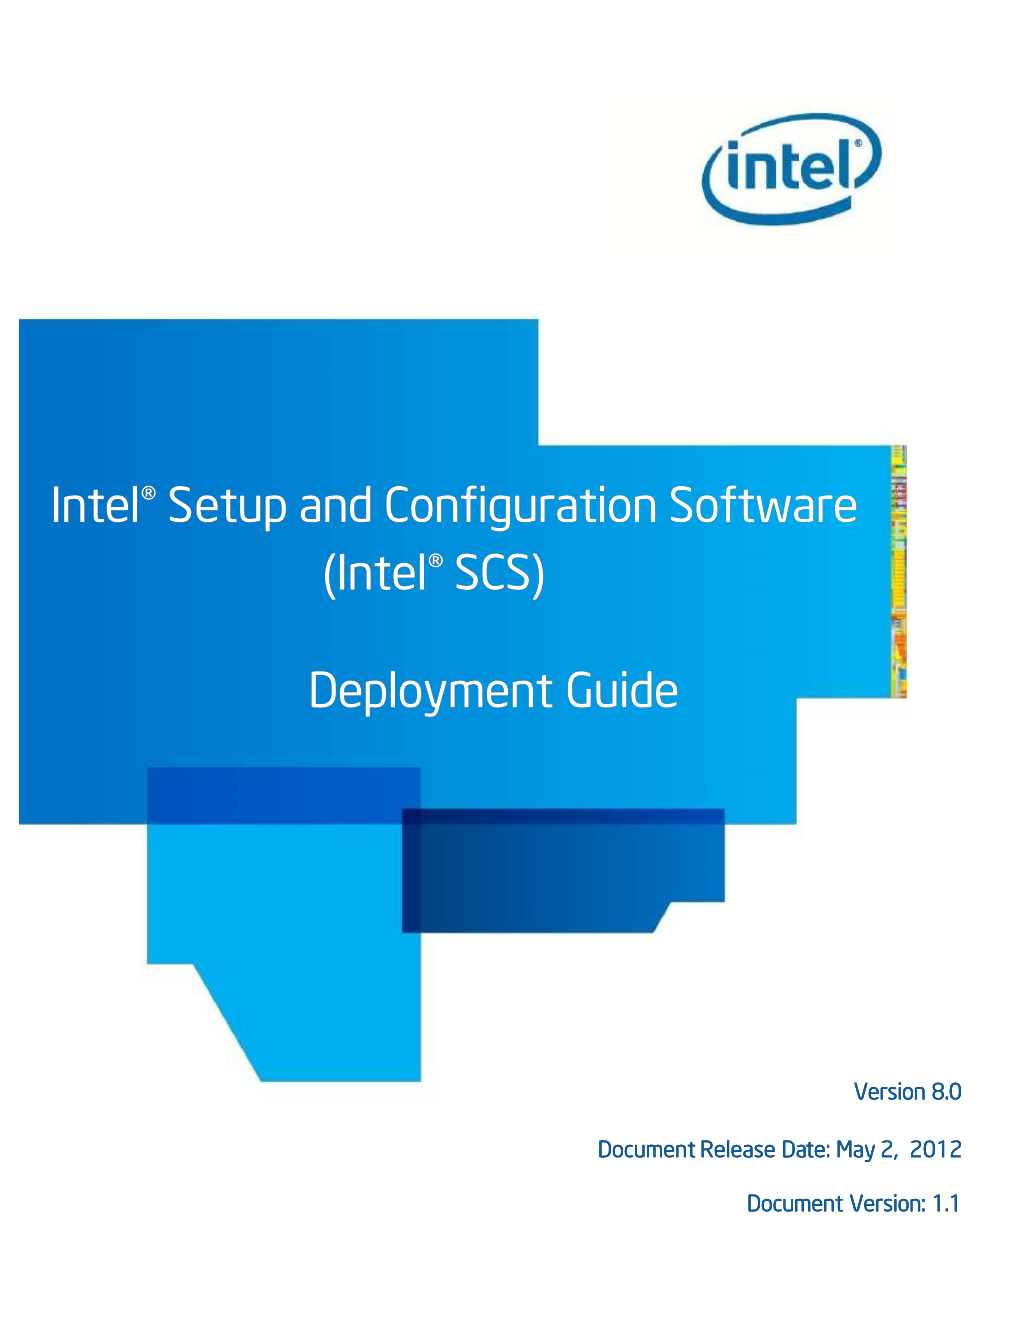 Intel® Setup and Configuration Software (Intel® SCS) Deployment Guide